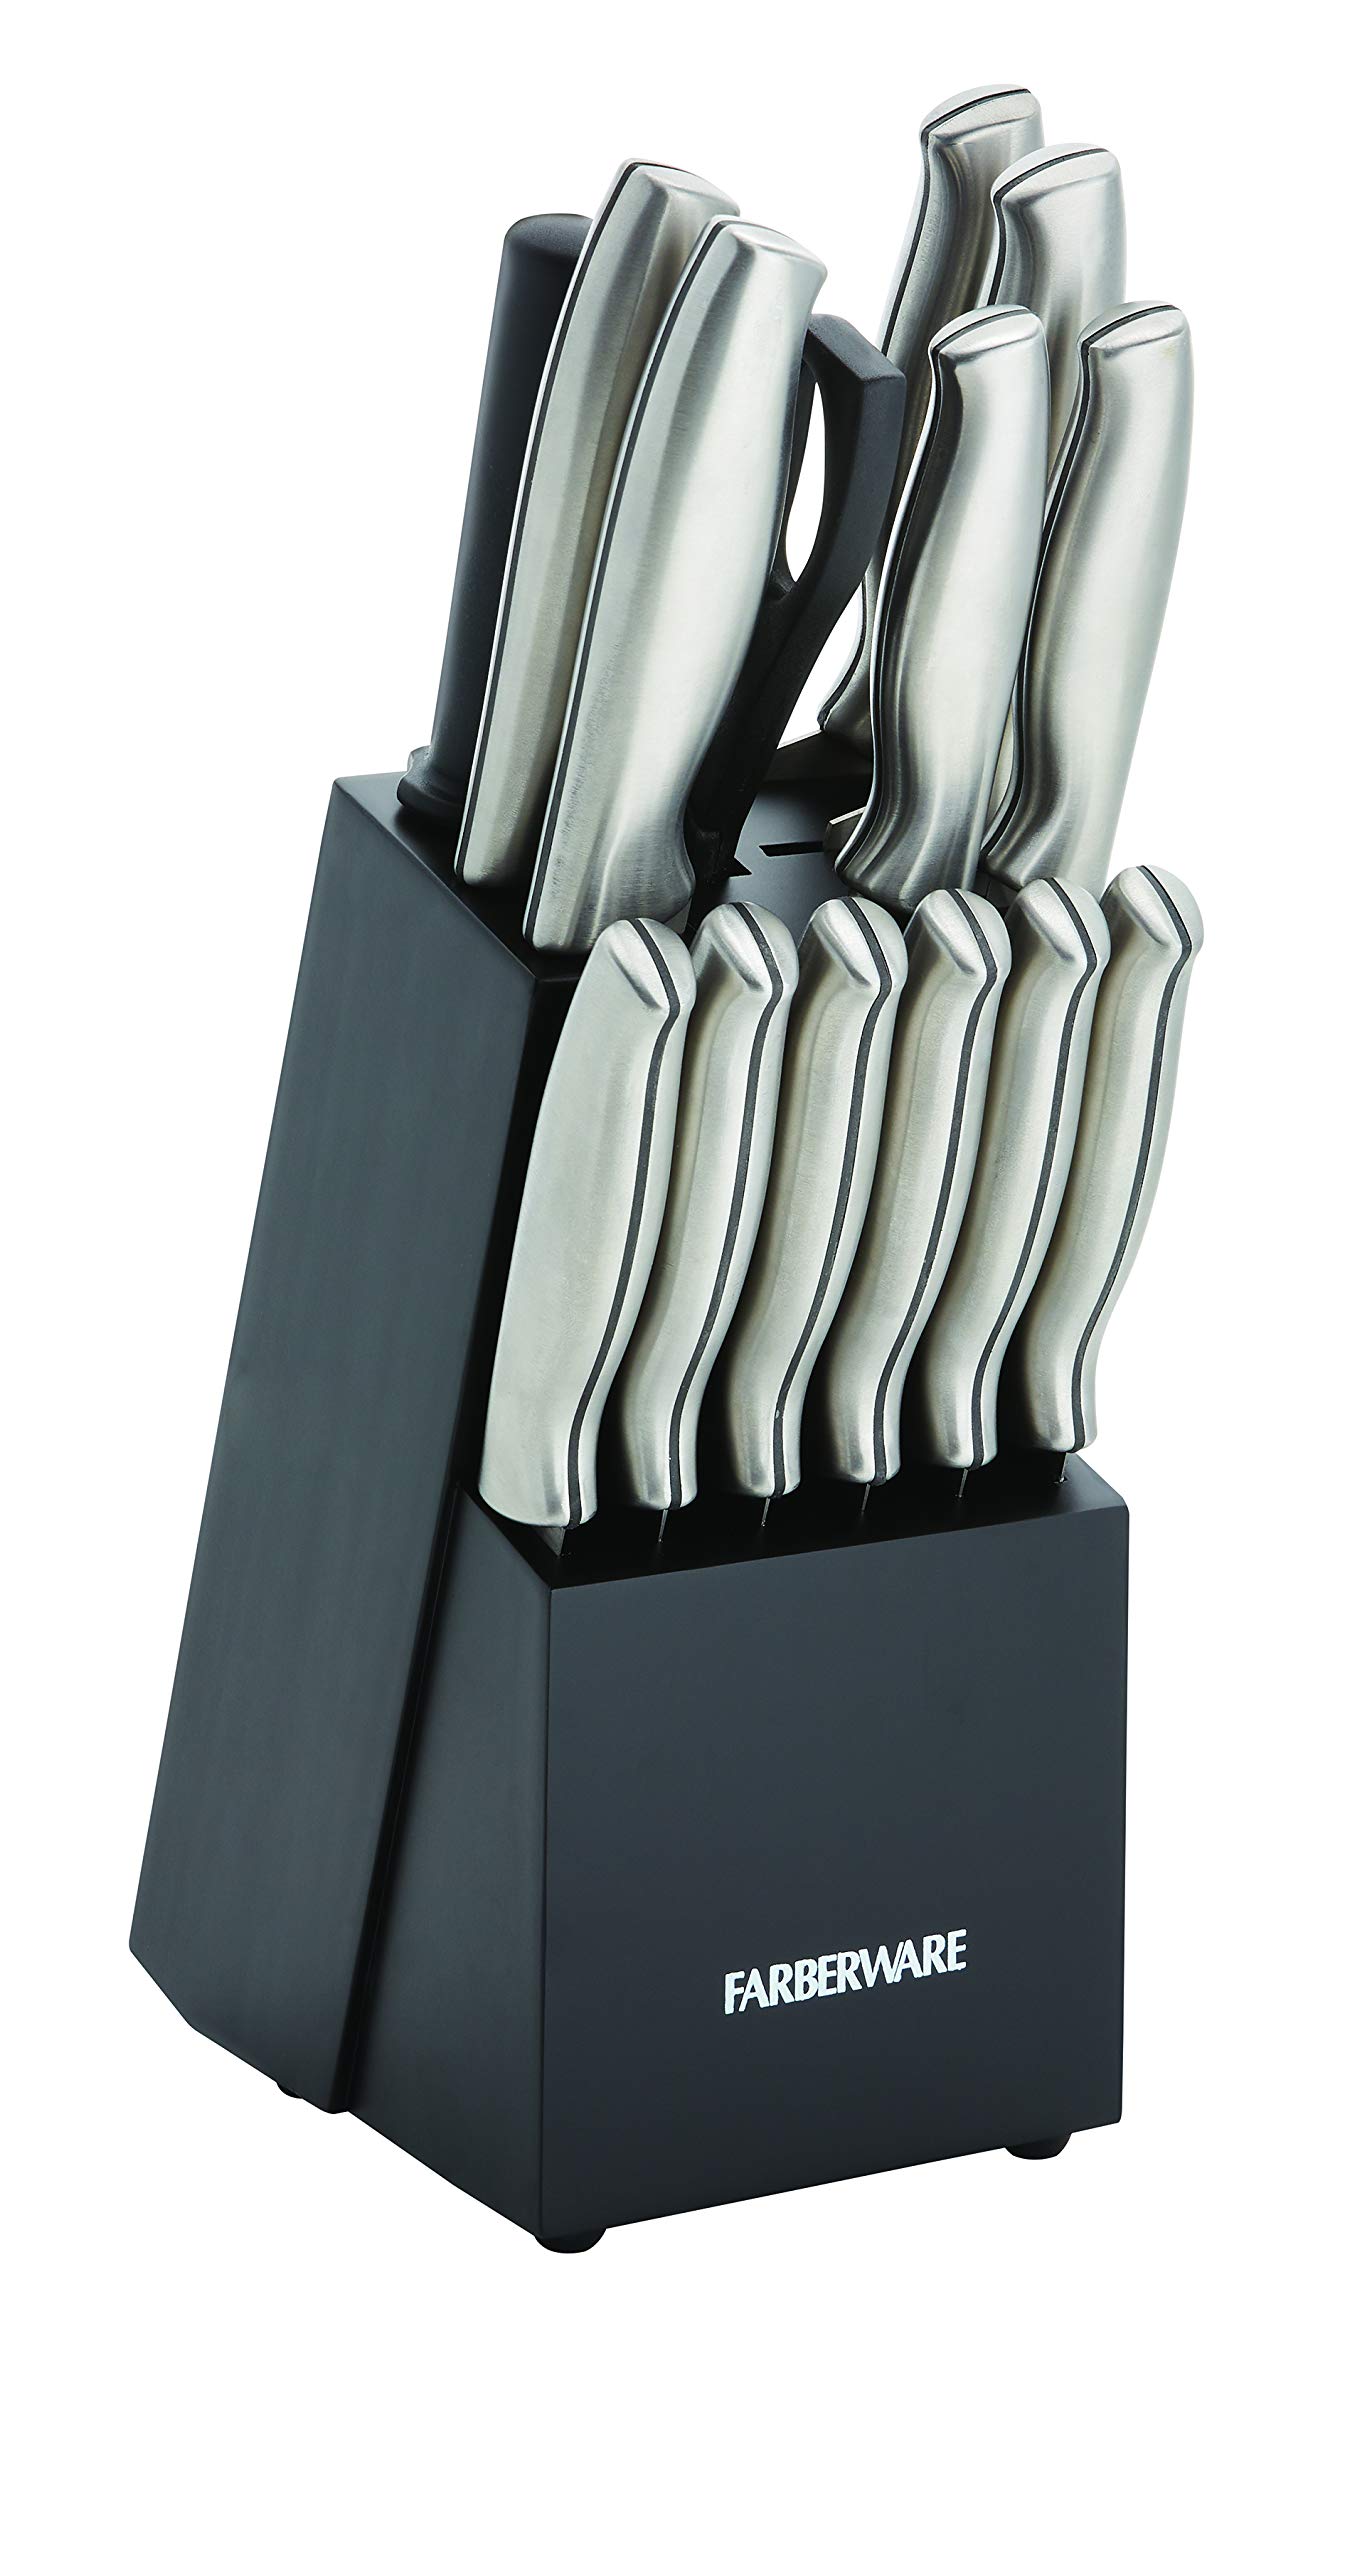 Farberware 15-Piece Stamped Stainless Steel Knife Block Set, High-Carbon Stainless Steel Kitchen Knife Set with Ergonomic Handles, Razor-Sharp Knives with Wood Block, 15-Piece, Black 2